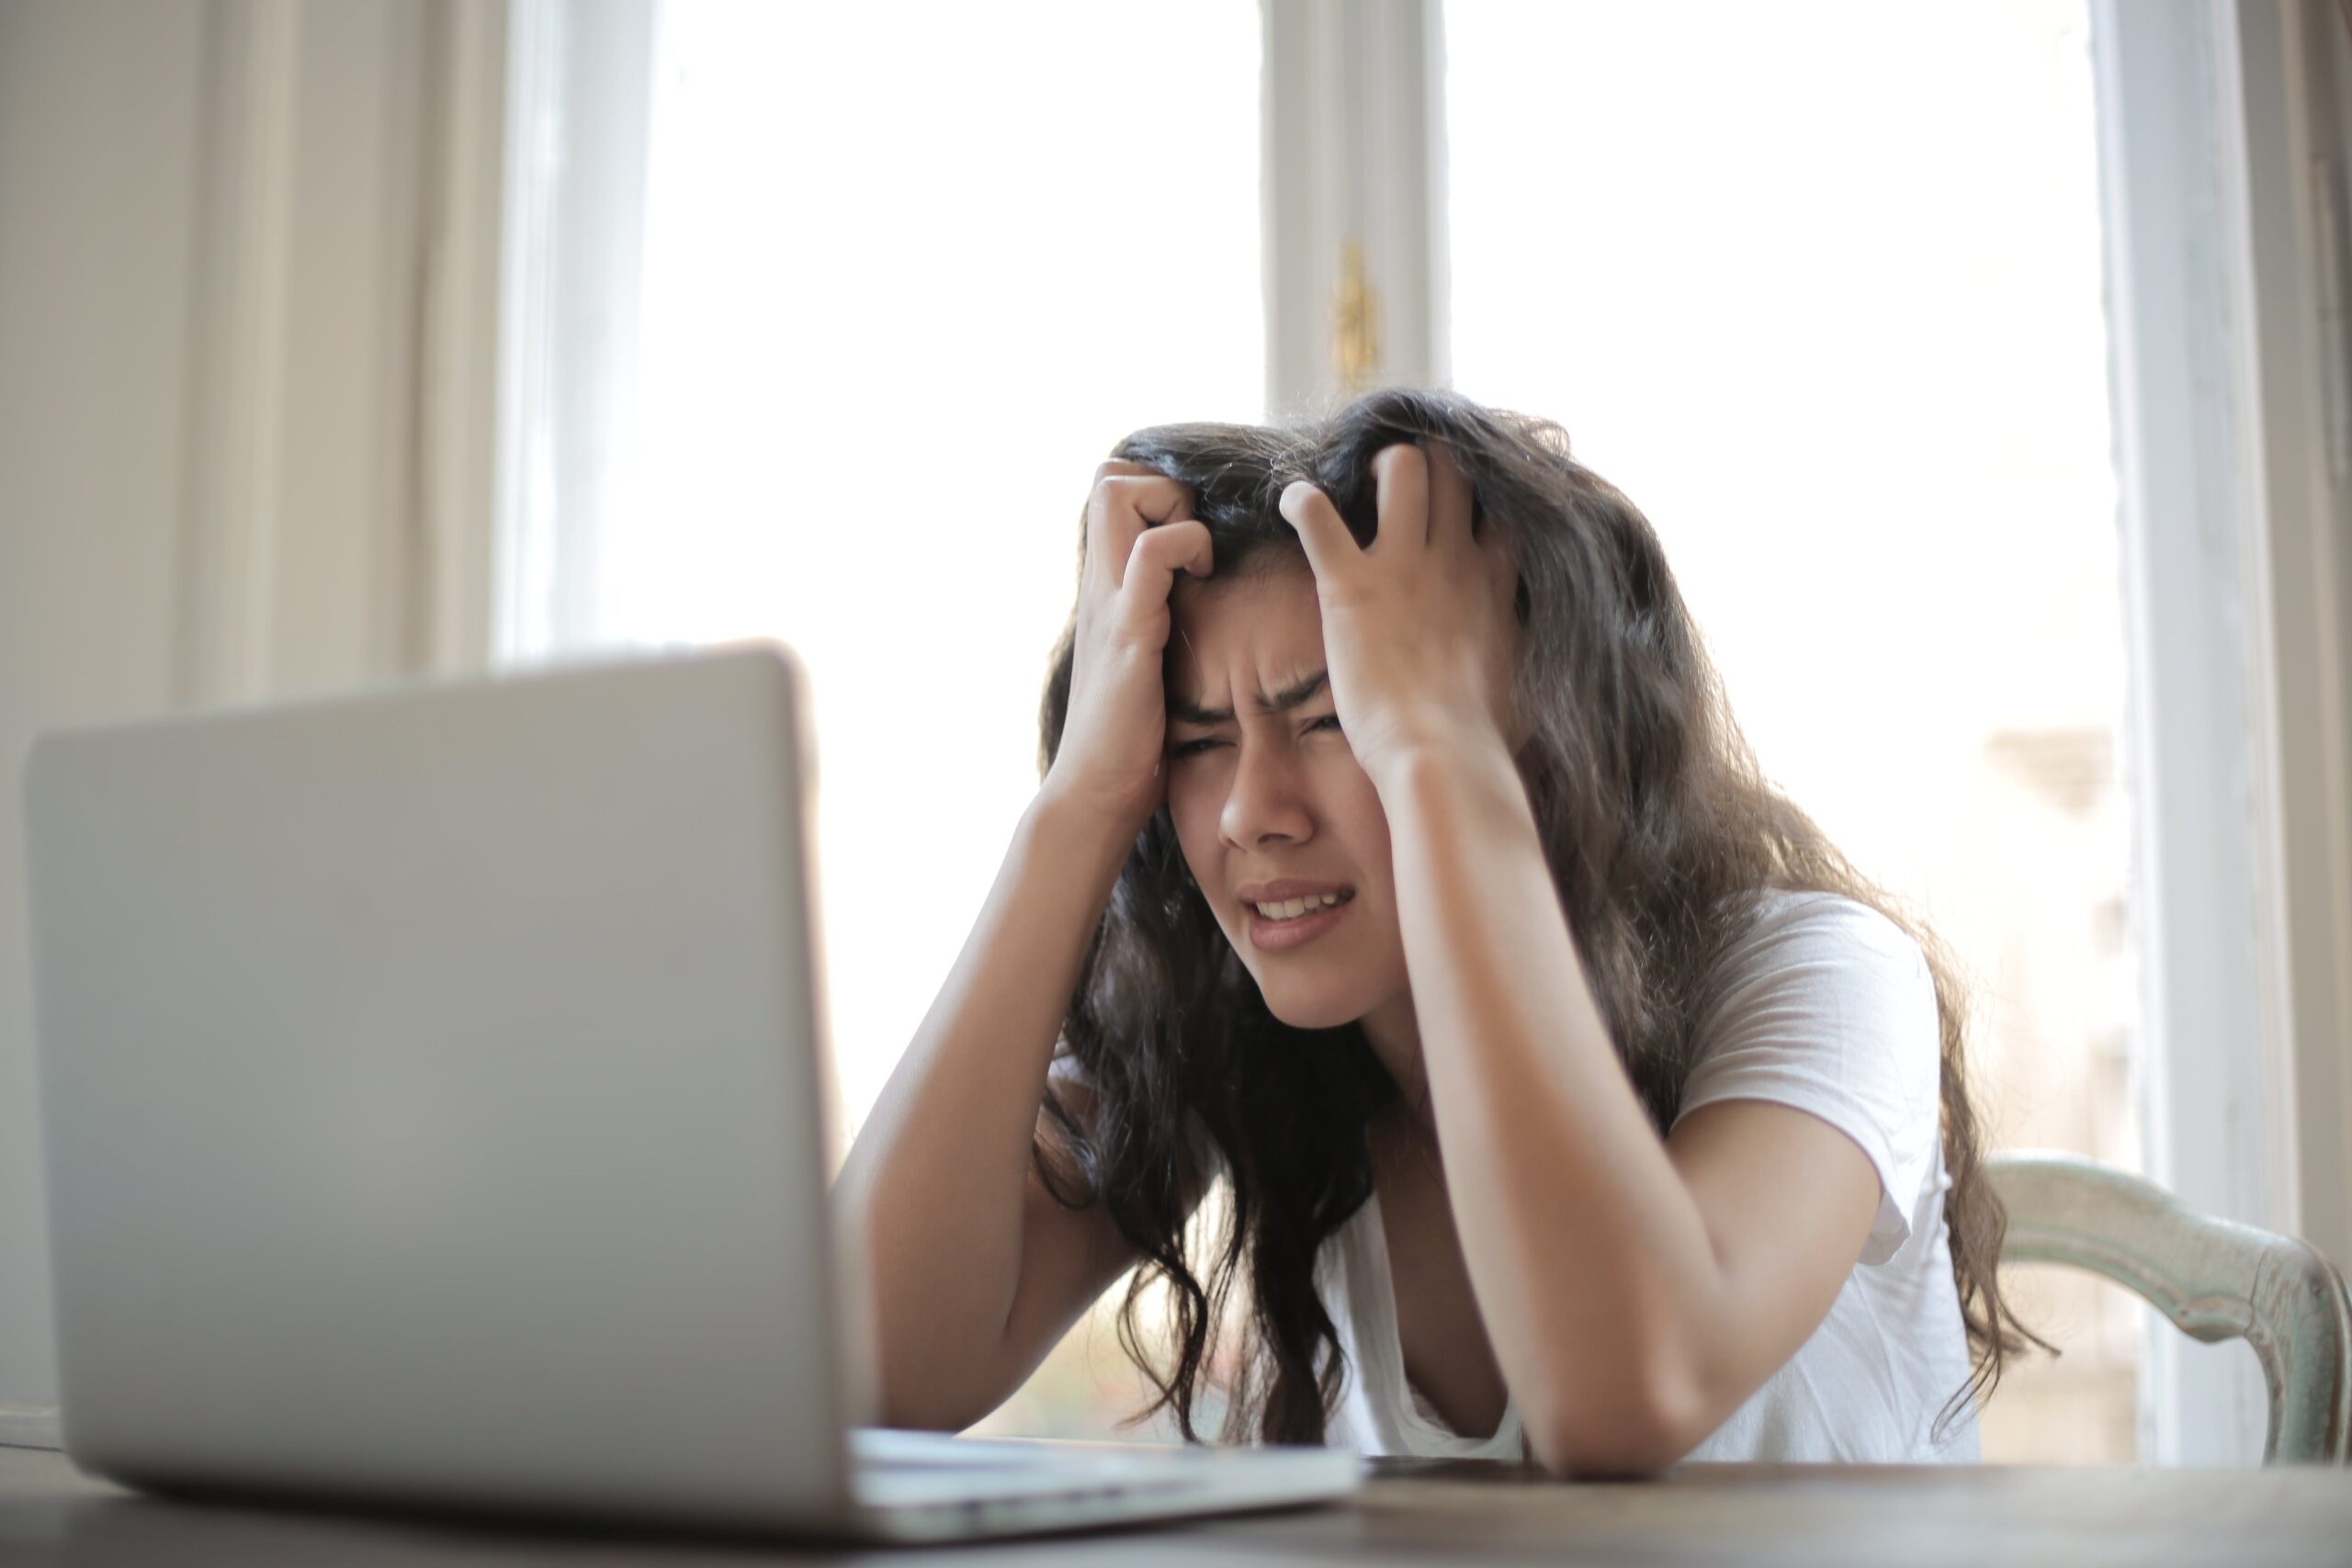 A frustrated woman running her hands through her hair while looking at a laptop | Source: Pexels